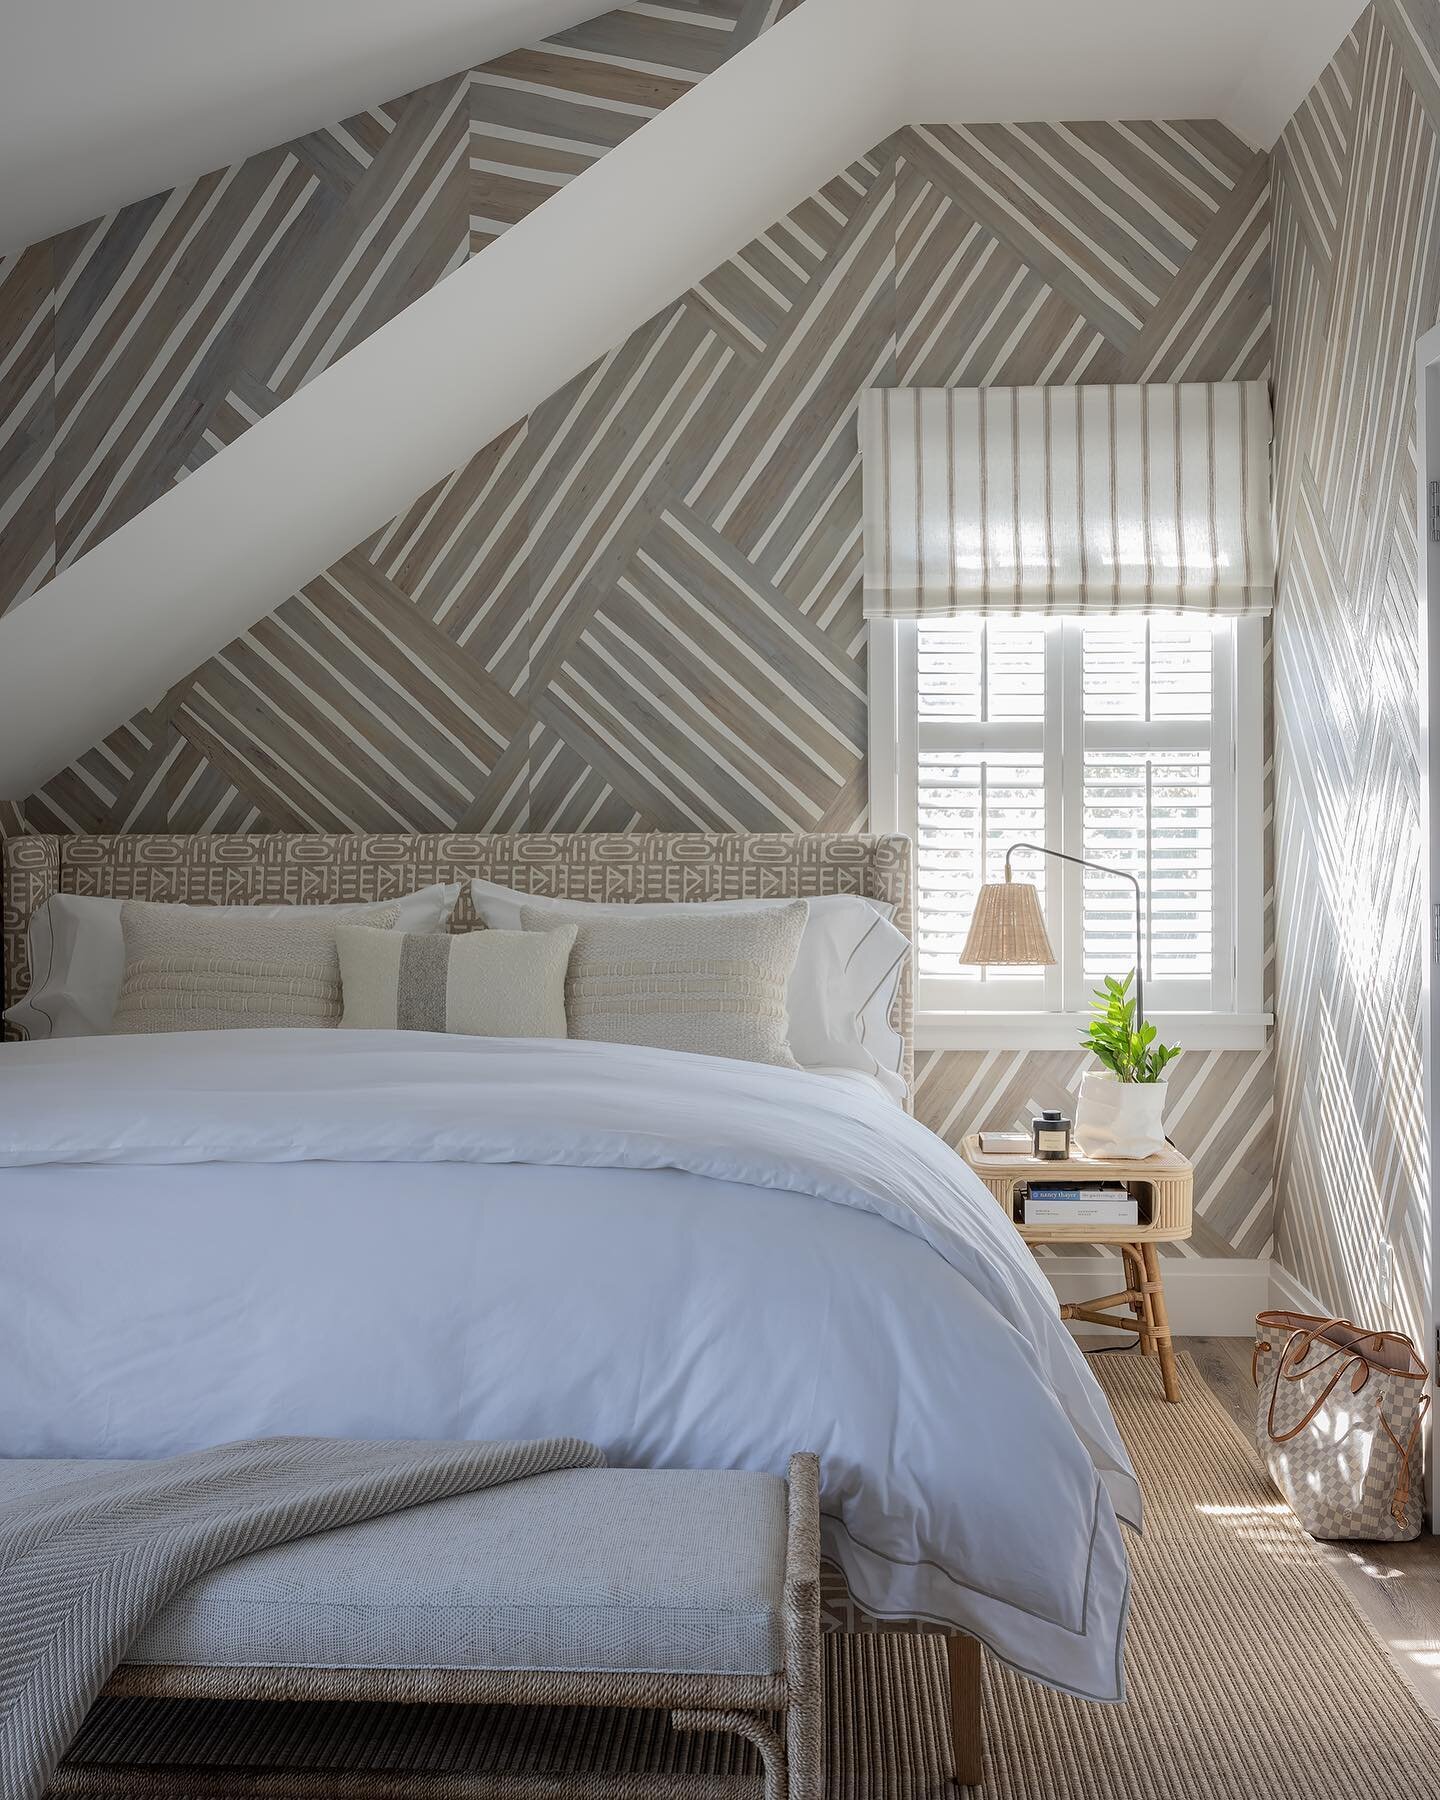 A boldly-scaled basket weave design makes this Nantucket guesthouse a visitor&rsquo;s dream 🧺 

📸 by @michaeljleephotography

.
.
.

#nancyhillinteriors #nancyhill #nhi #interiordesign #interiordecorating #interiordesigner #interiordecor #interior 